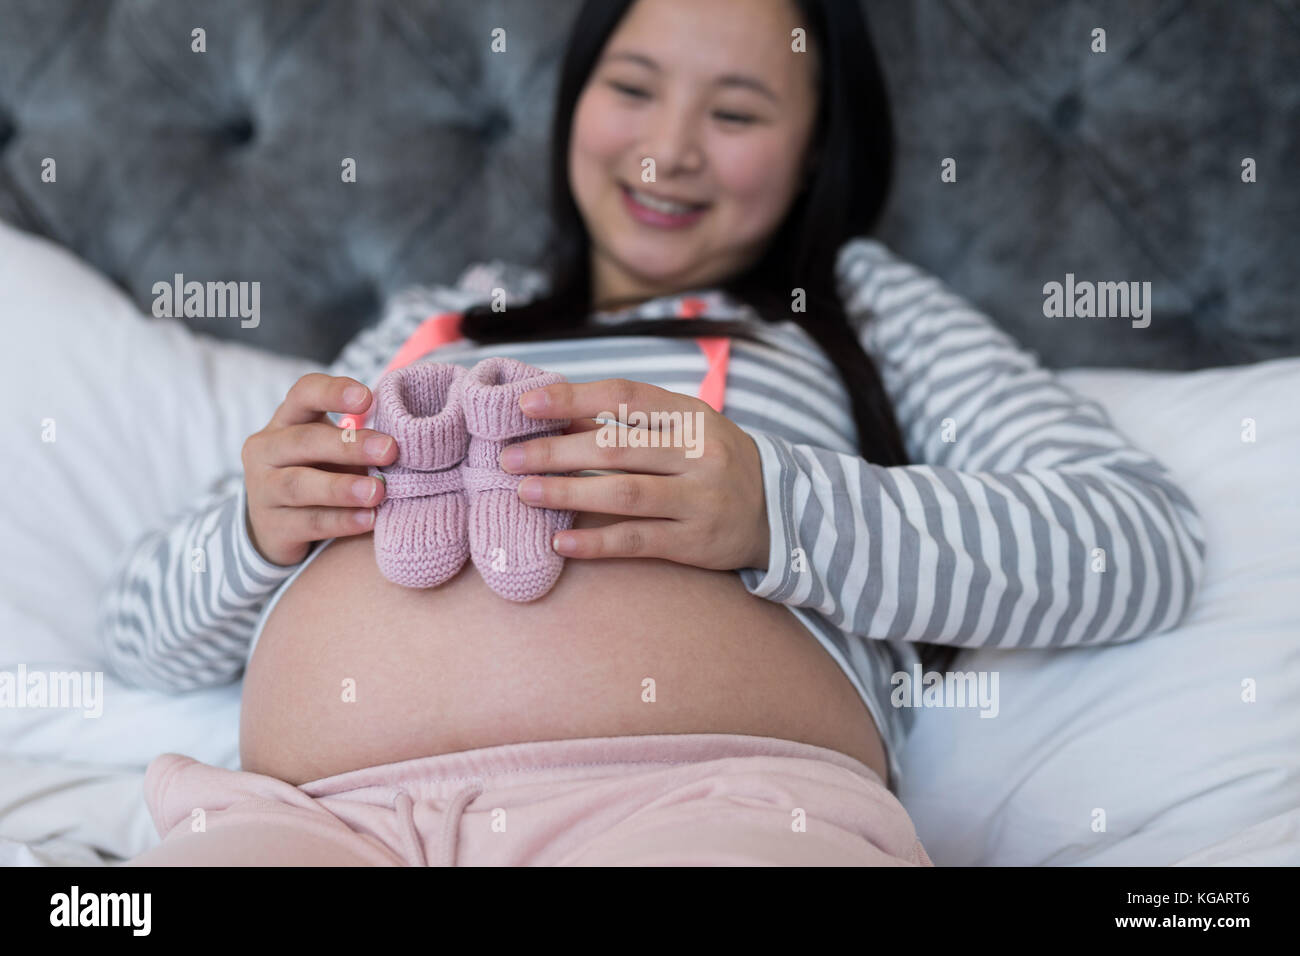 Pregnant woman looking at socks in bedroom Stock Photo